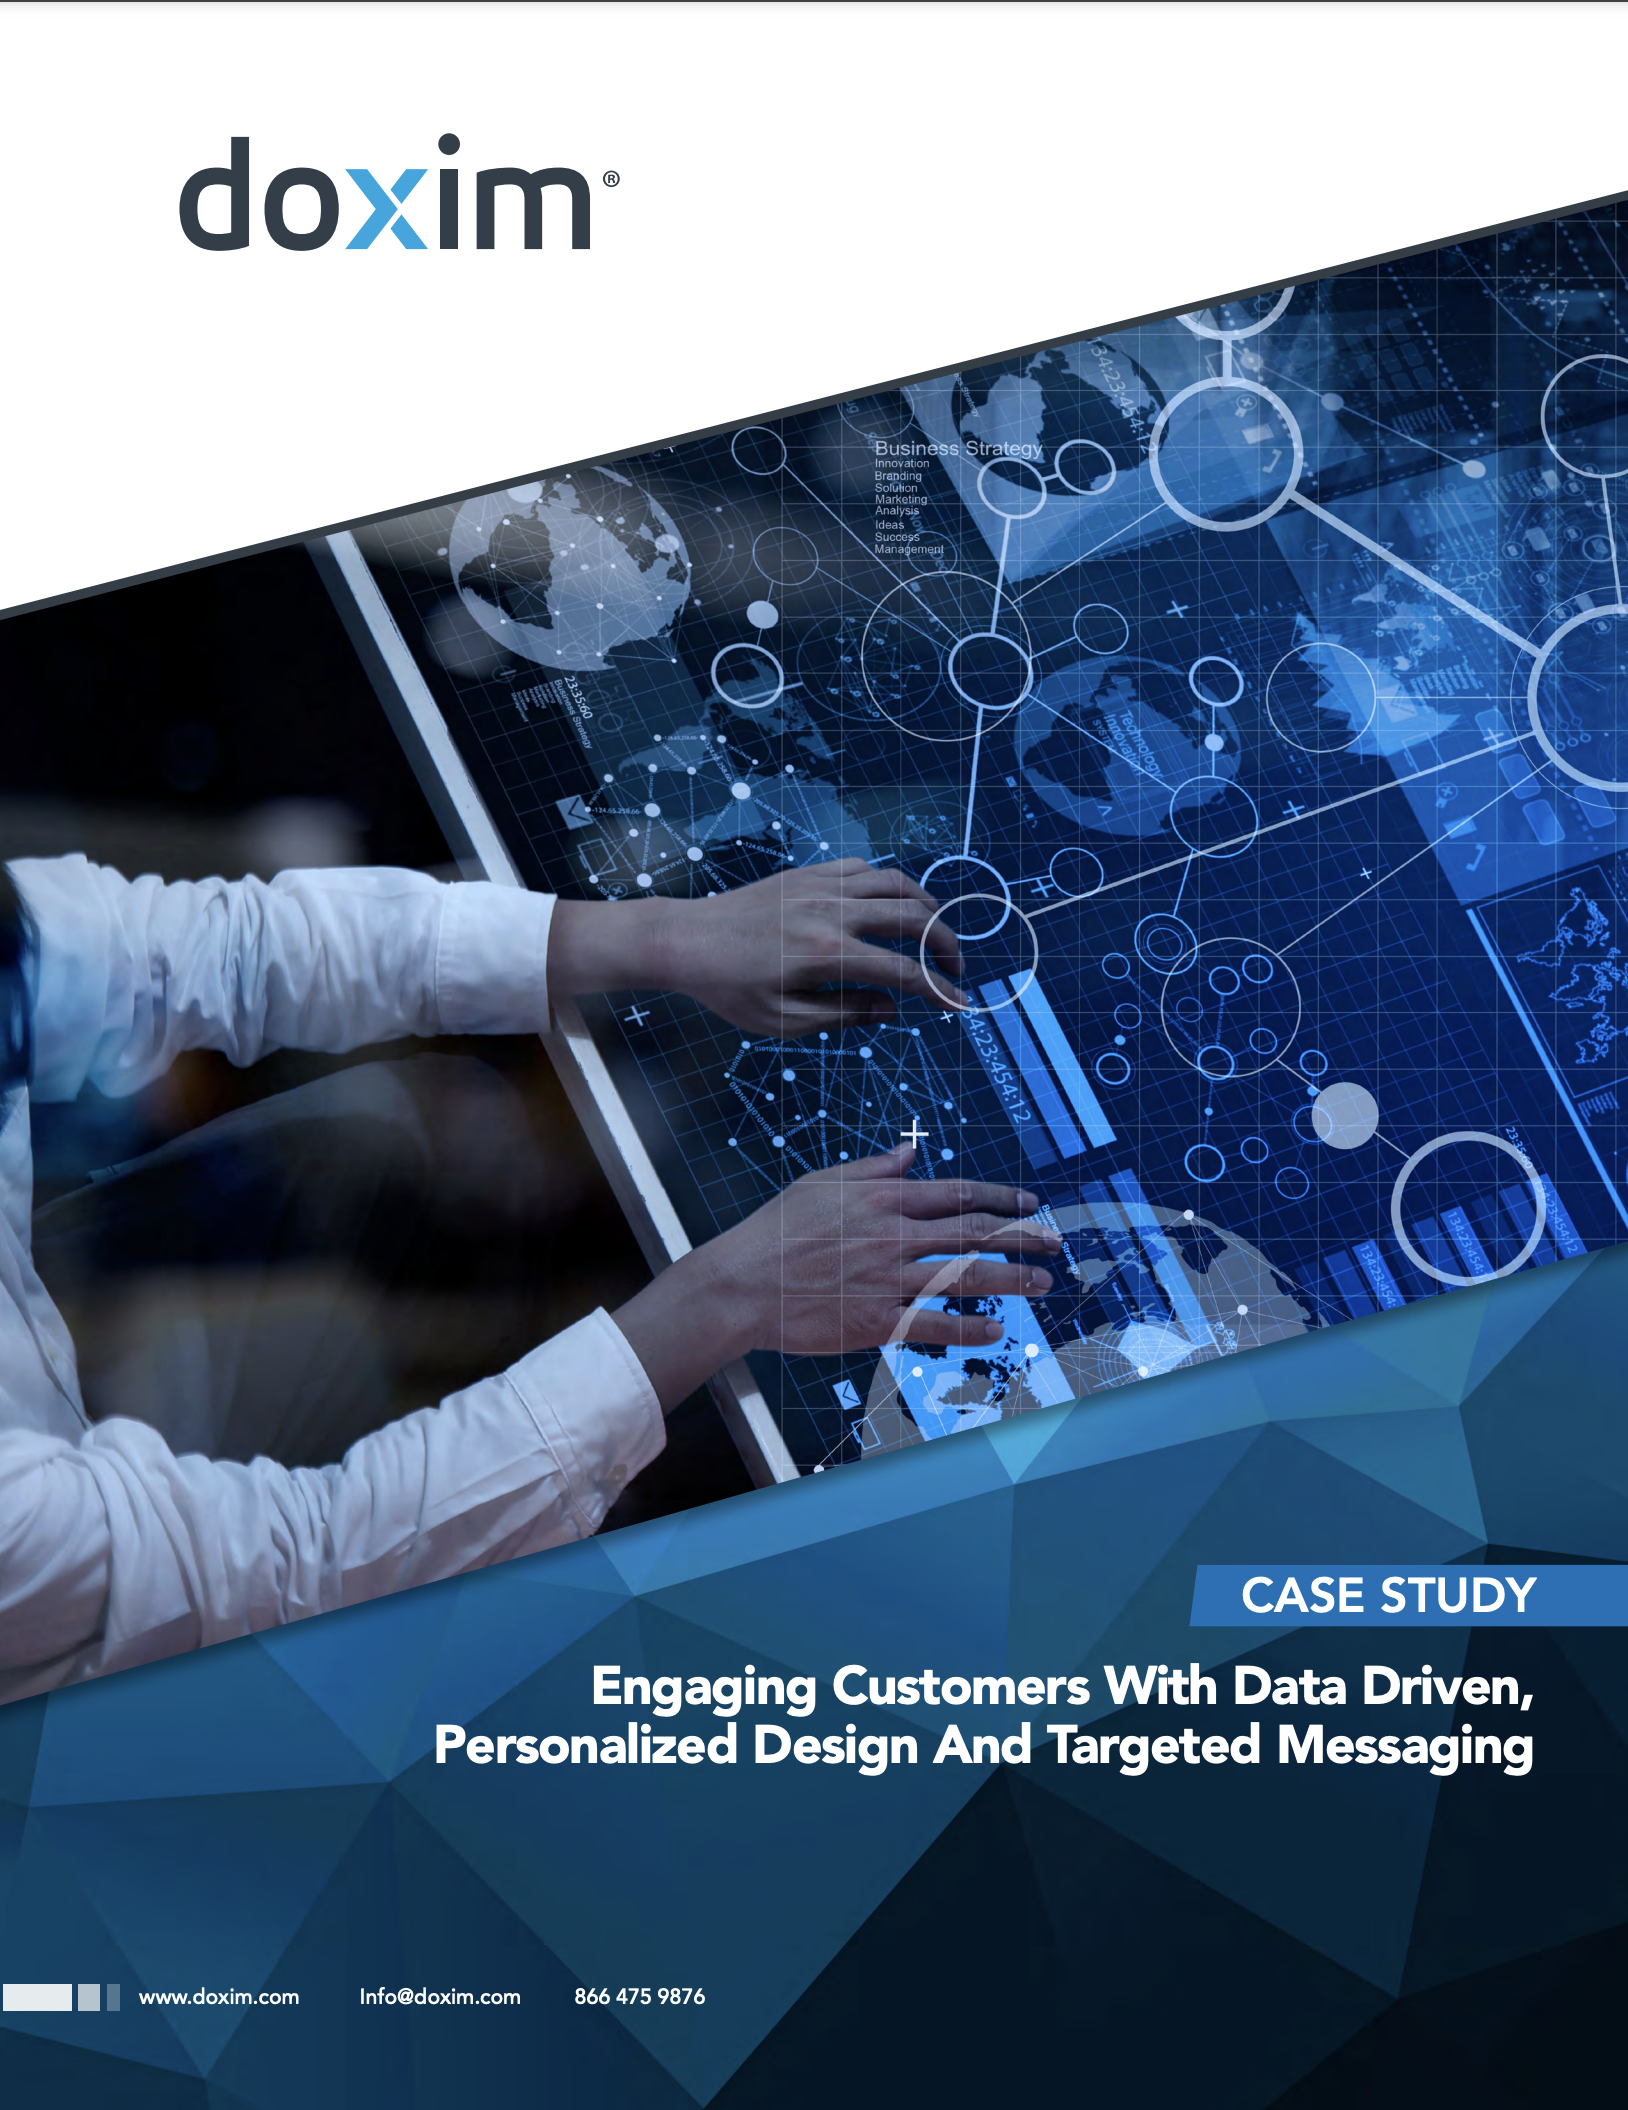 Case study: Case Study: Engaging Customers With Data Driven, Personalized Design And Targeted Messaging